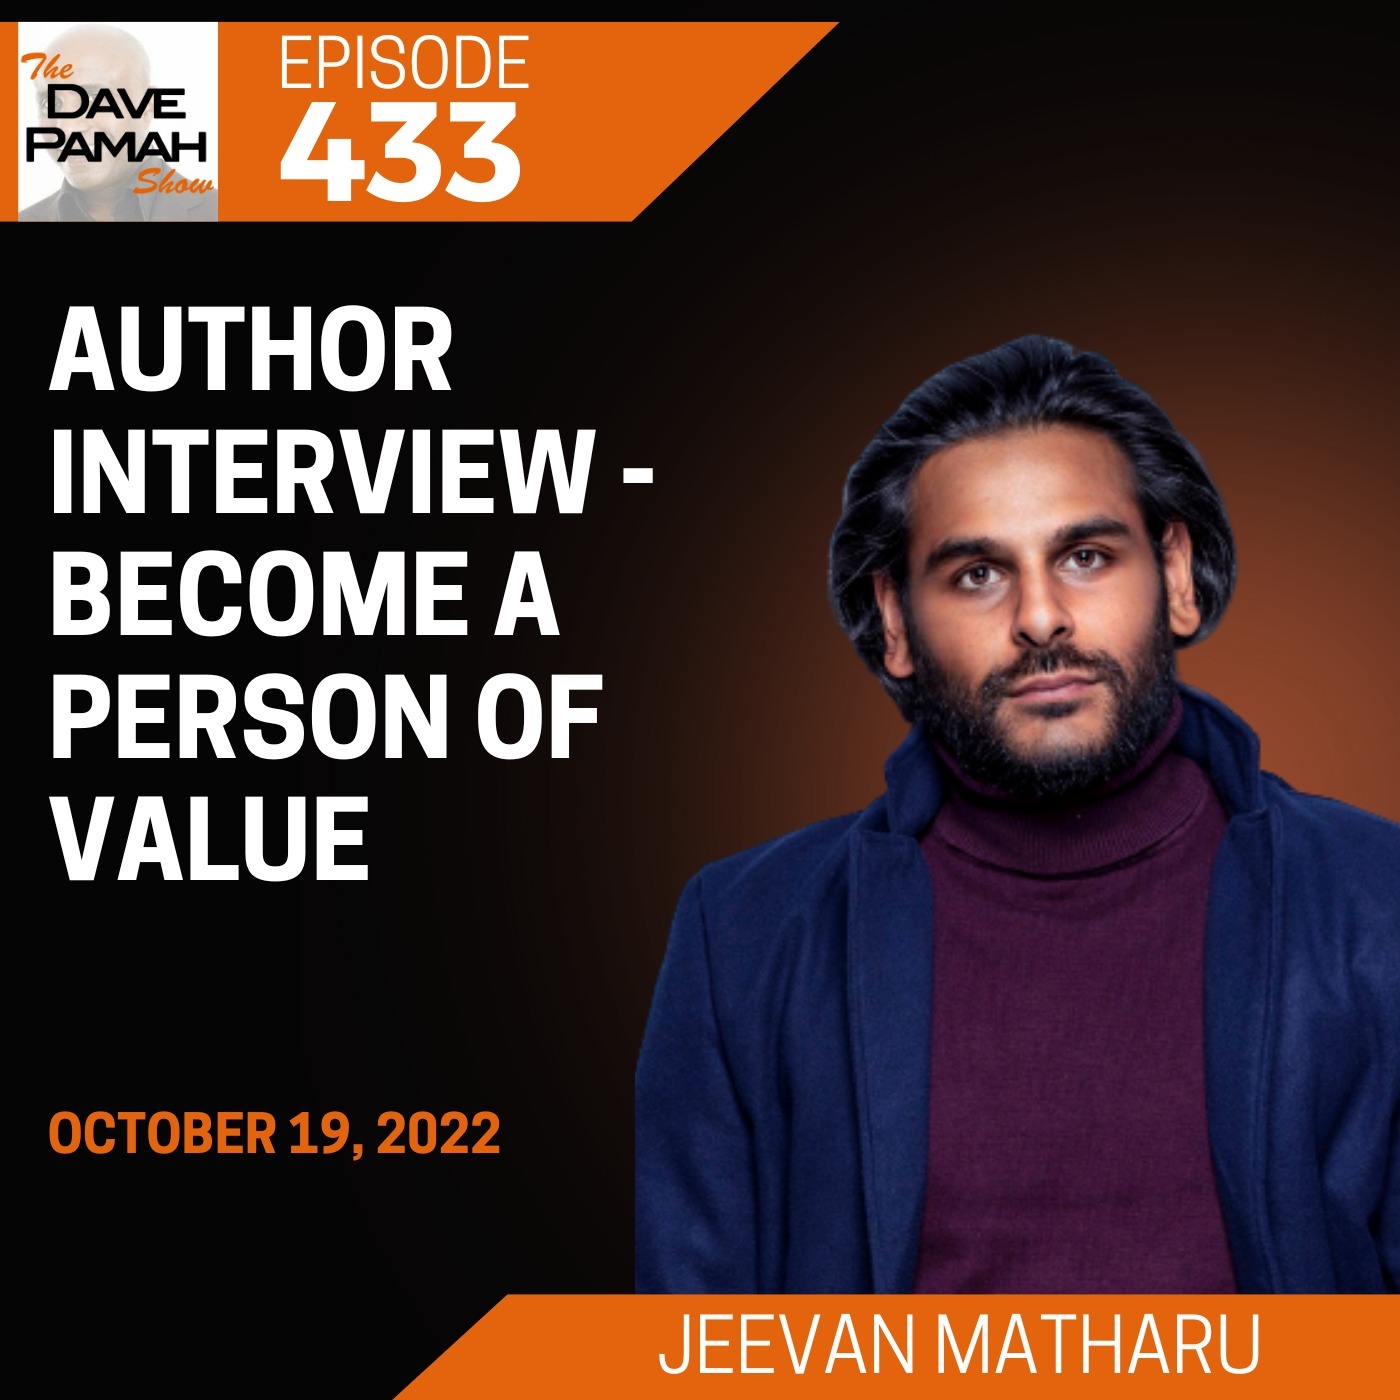 Author interview - Become a Person of Value with Jeevan Matharu Image